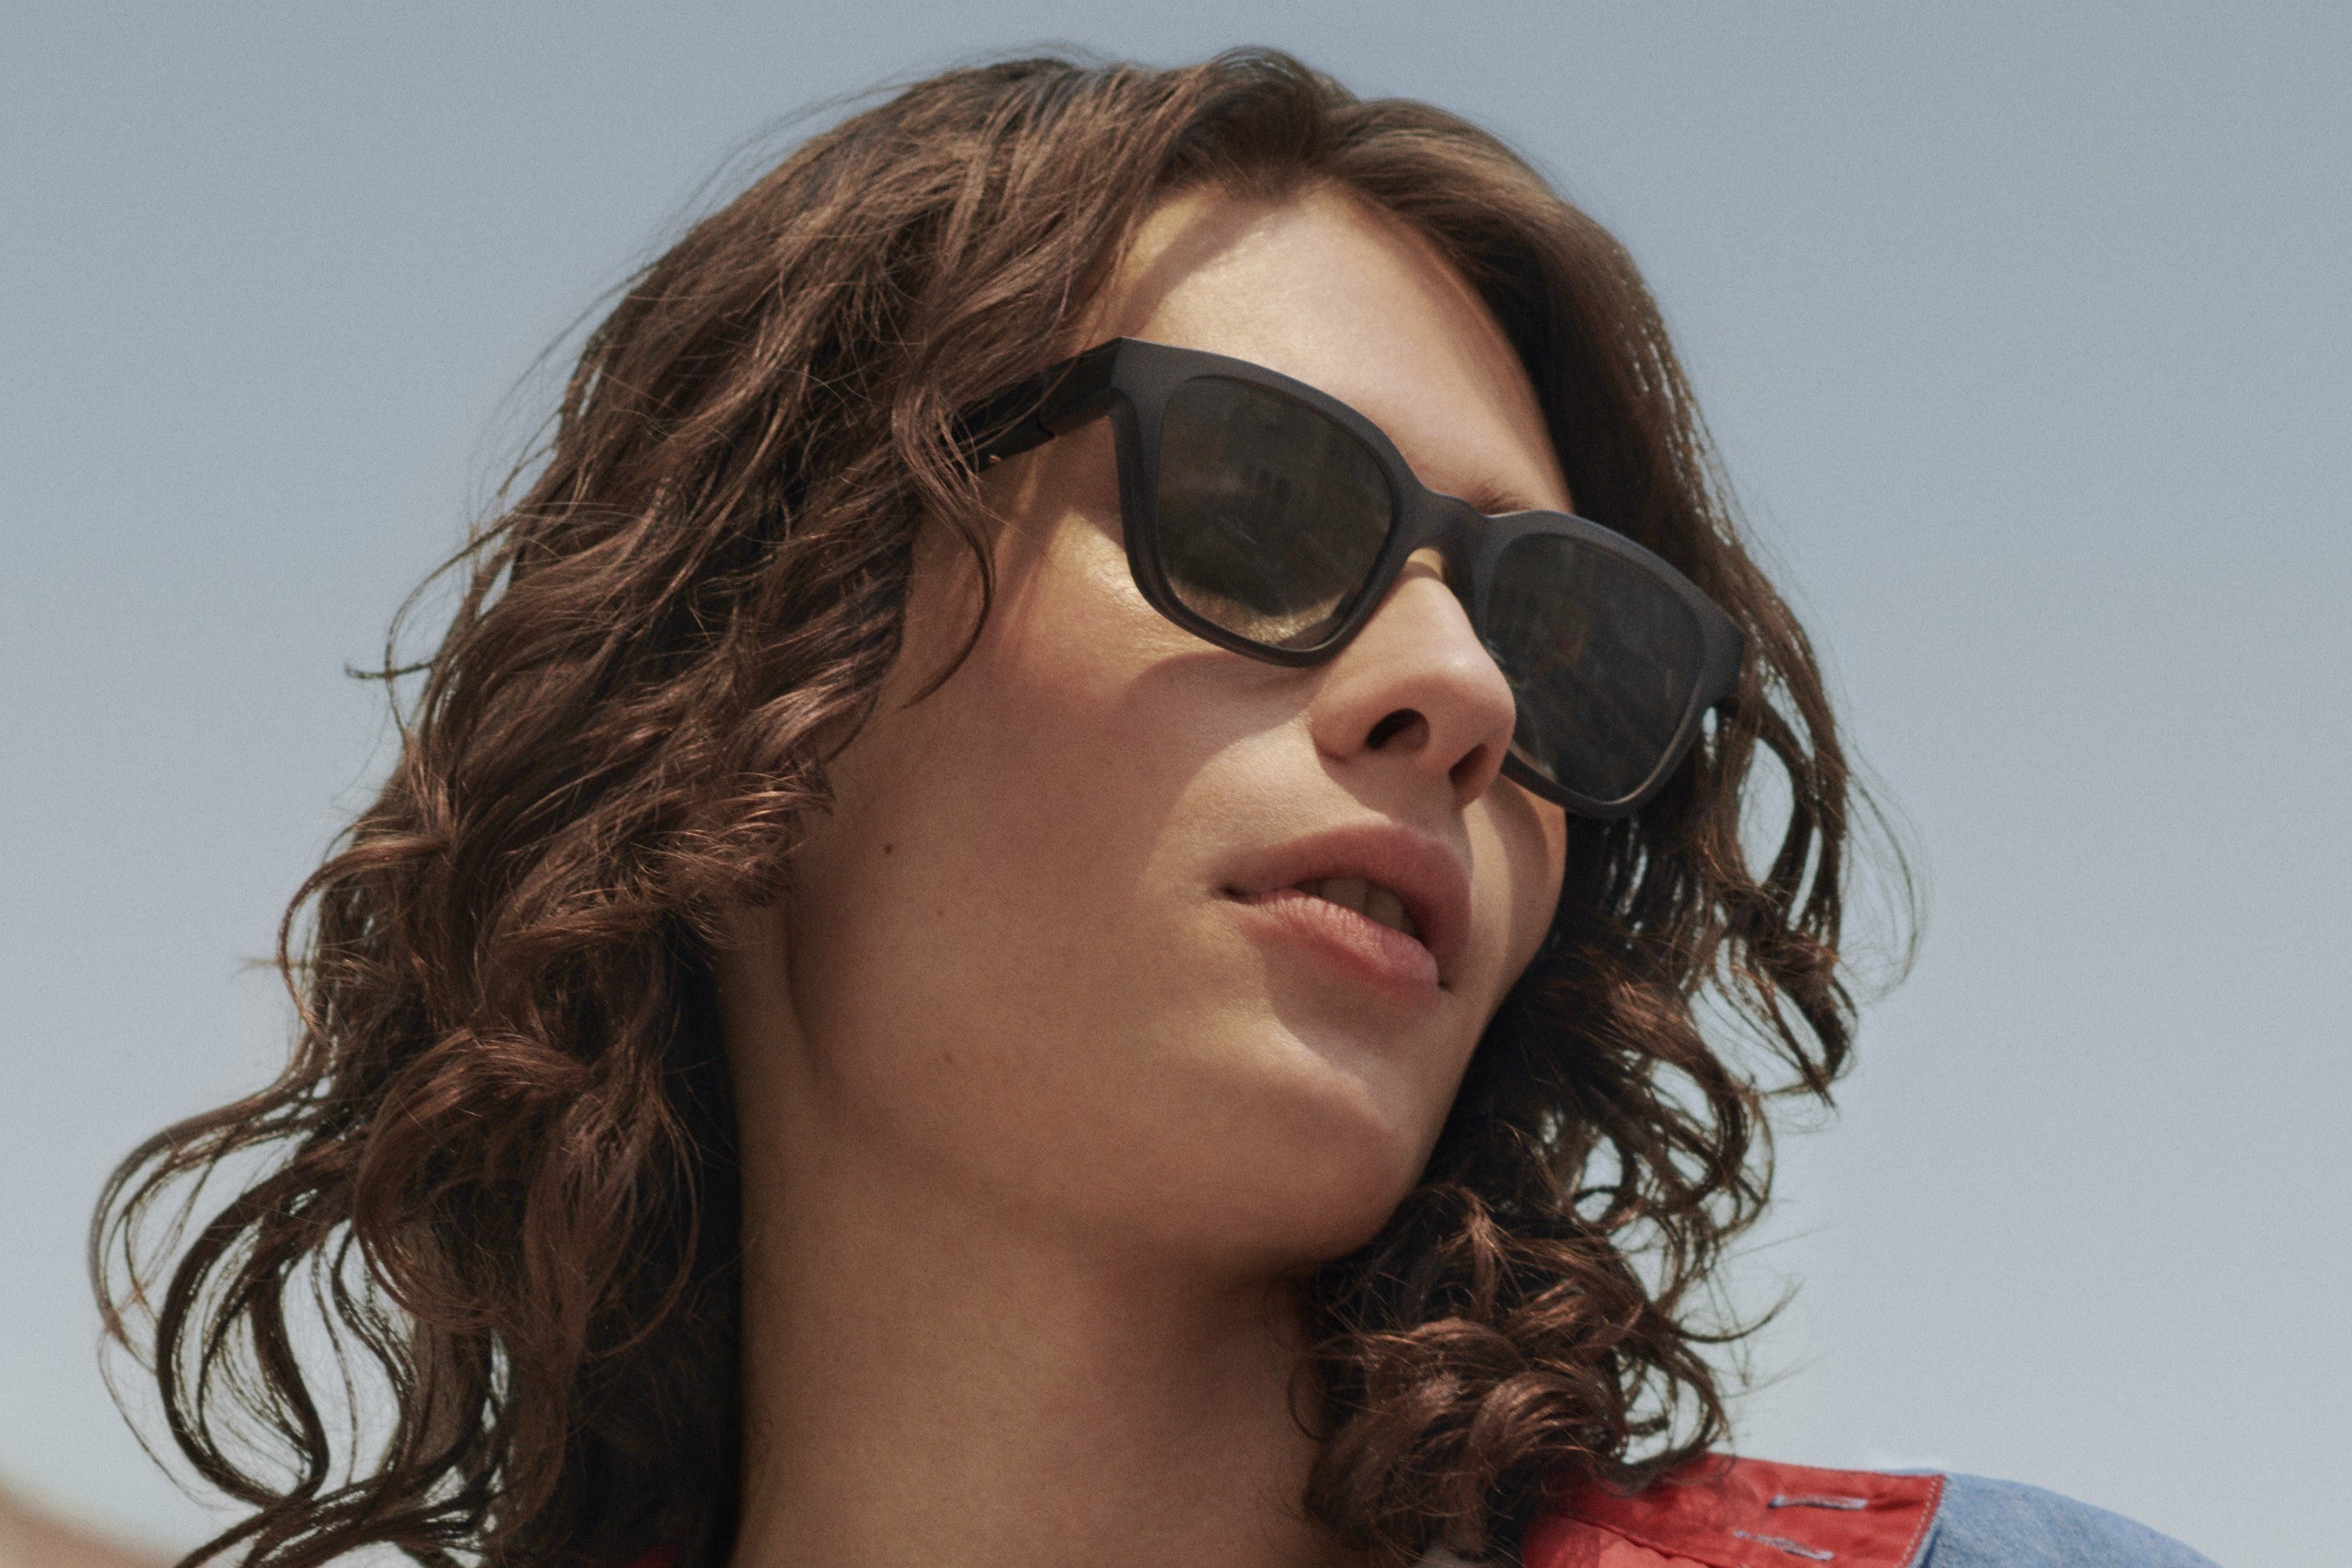 Bose Frames review: Made in the shades | TechHive